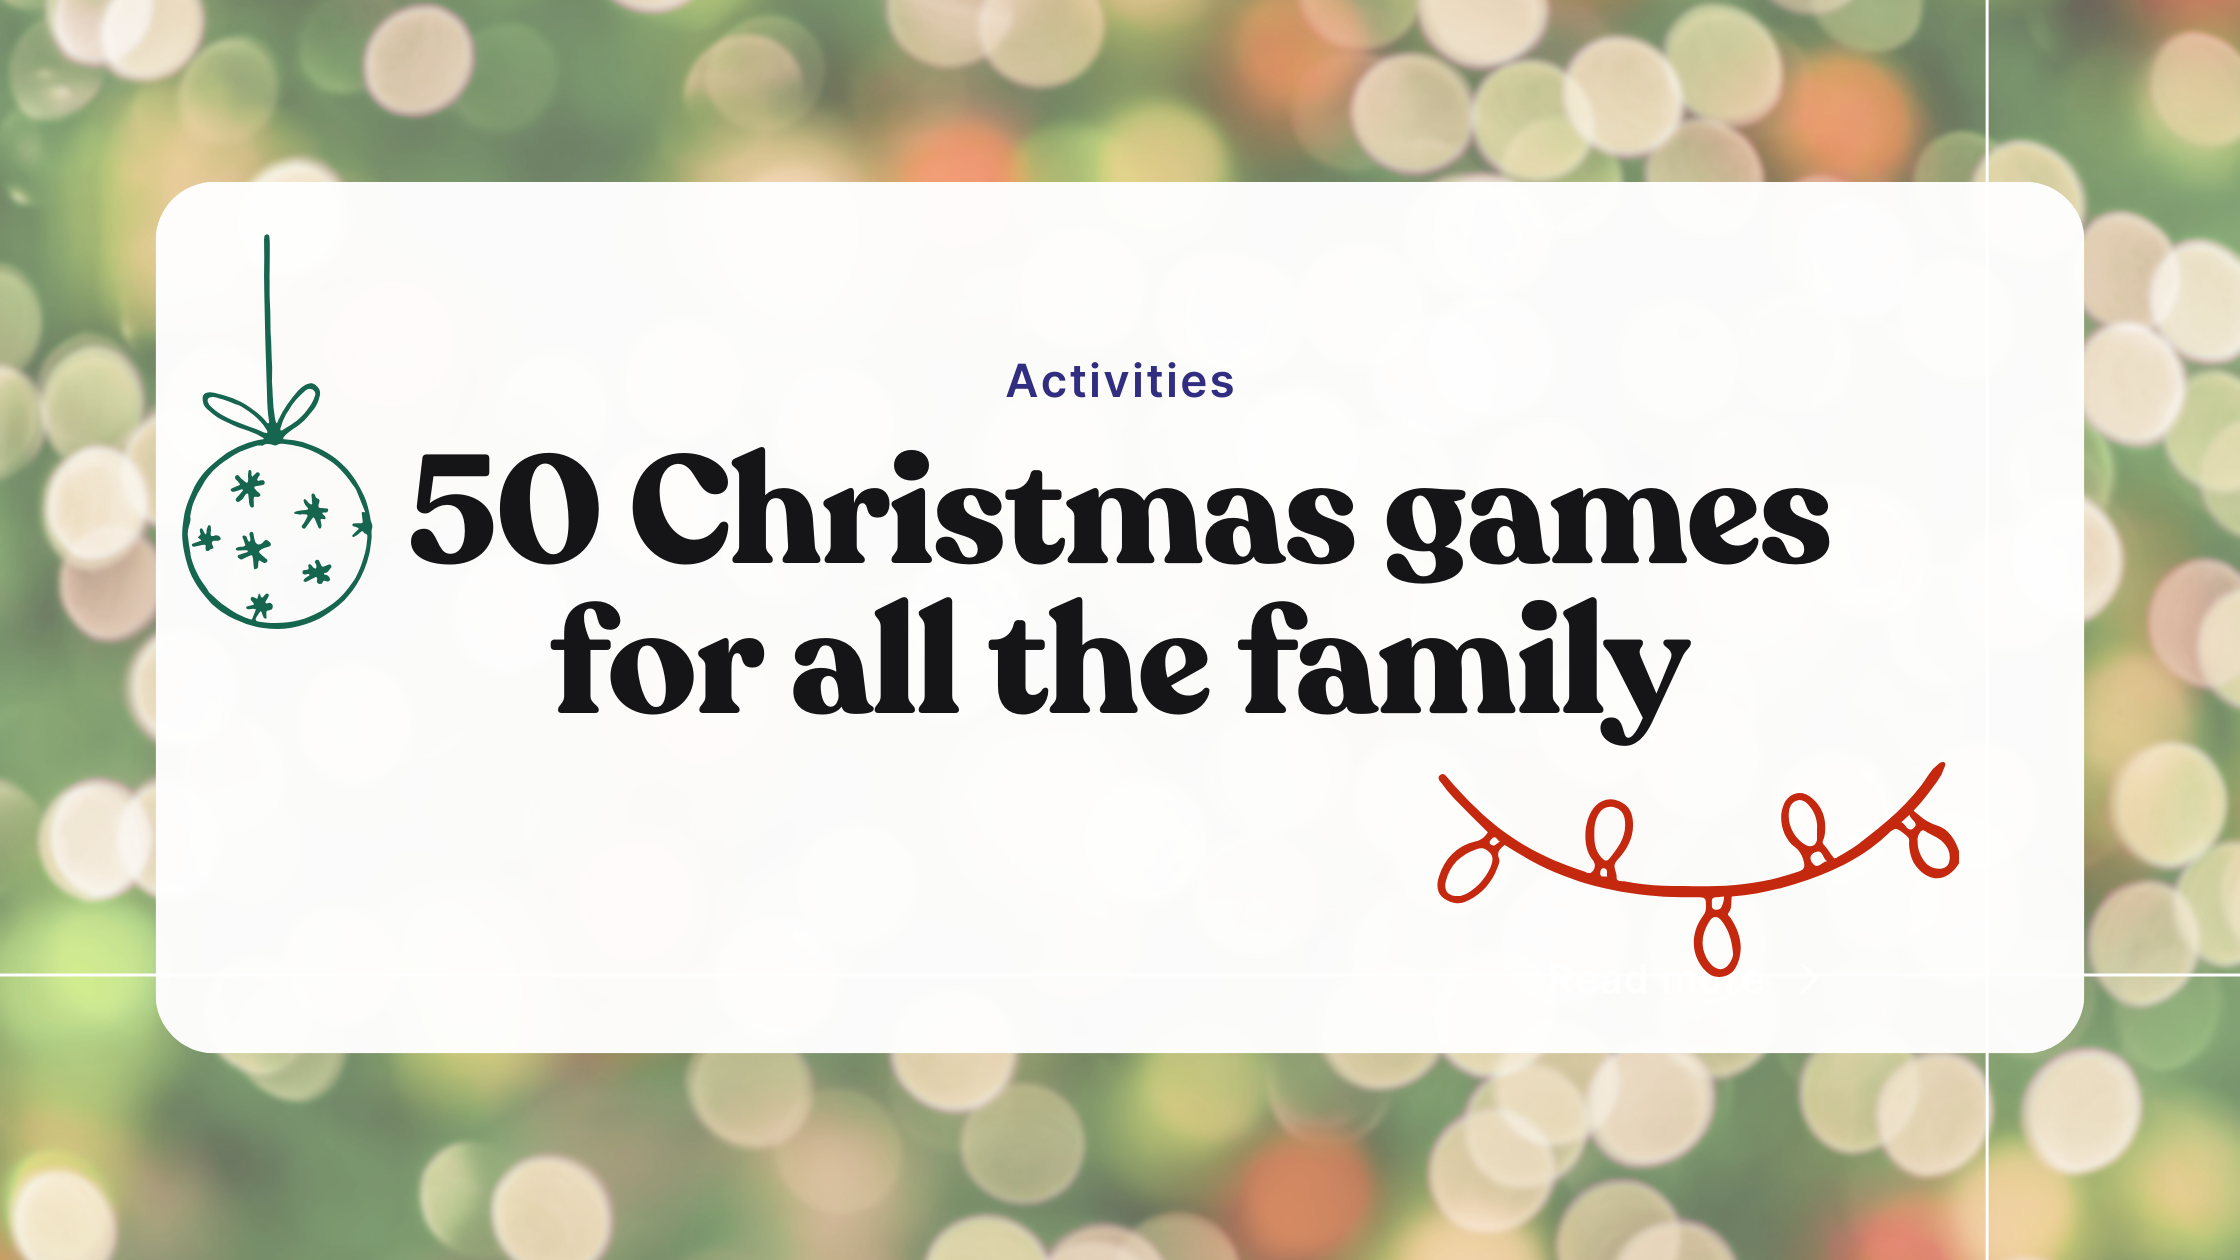 50 Christmas games for all the family